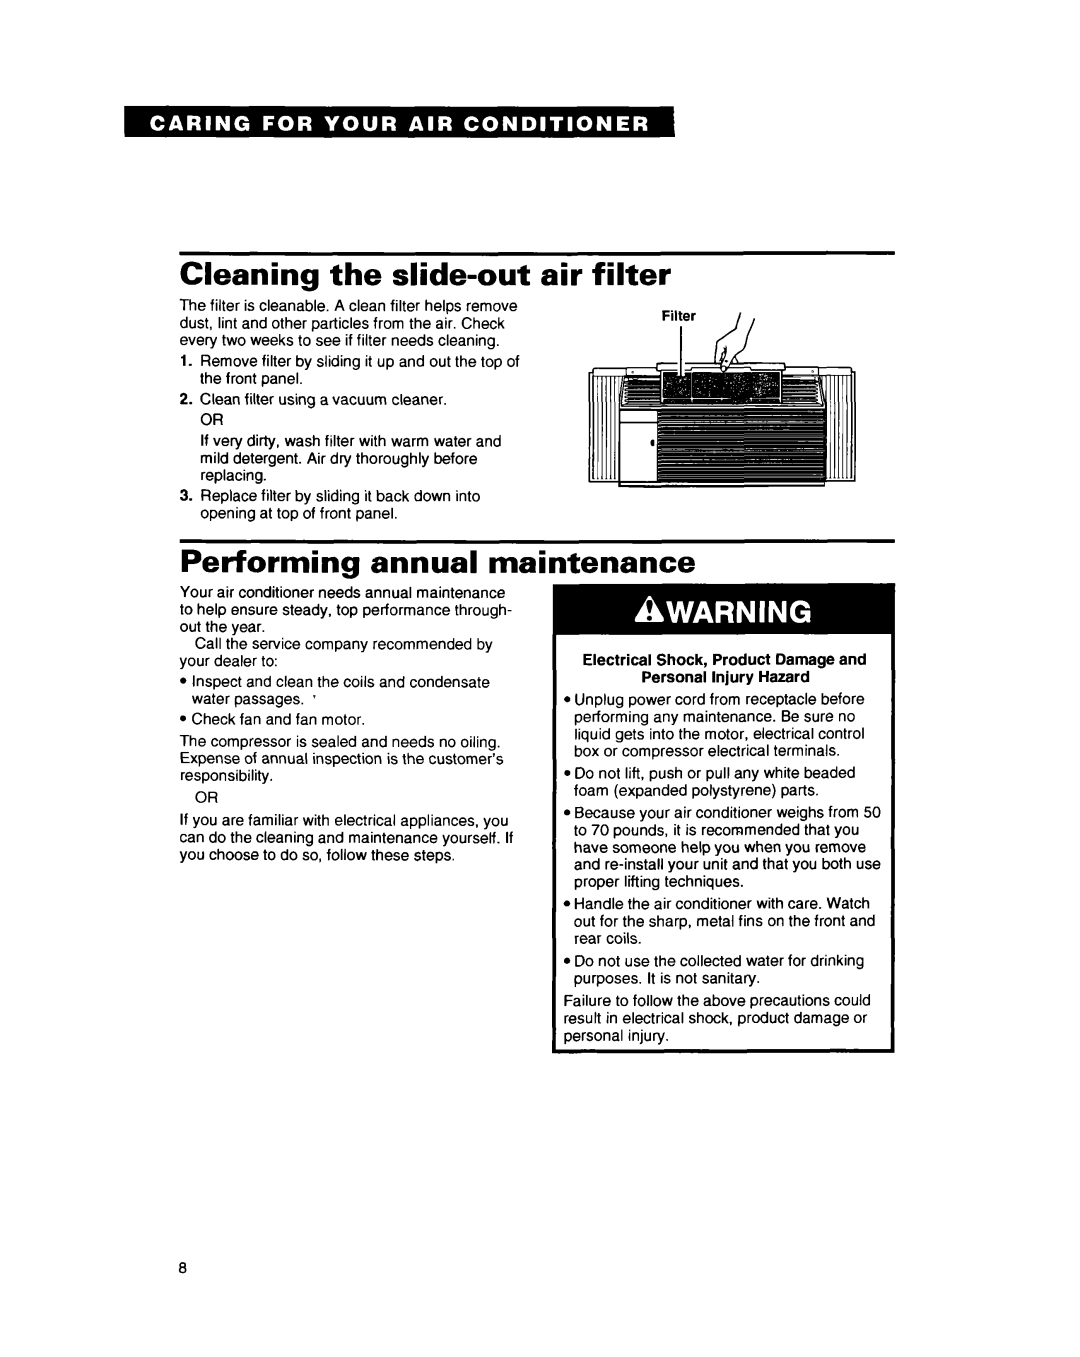 Whirlpool ACQ062, AC0052 warranty Cleaning the slide-outair filter, Performing annual maintenance 